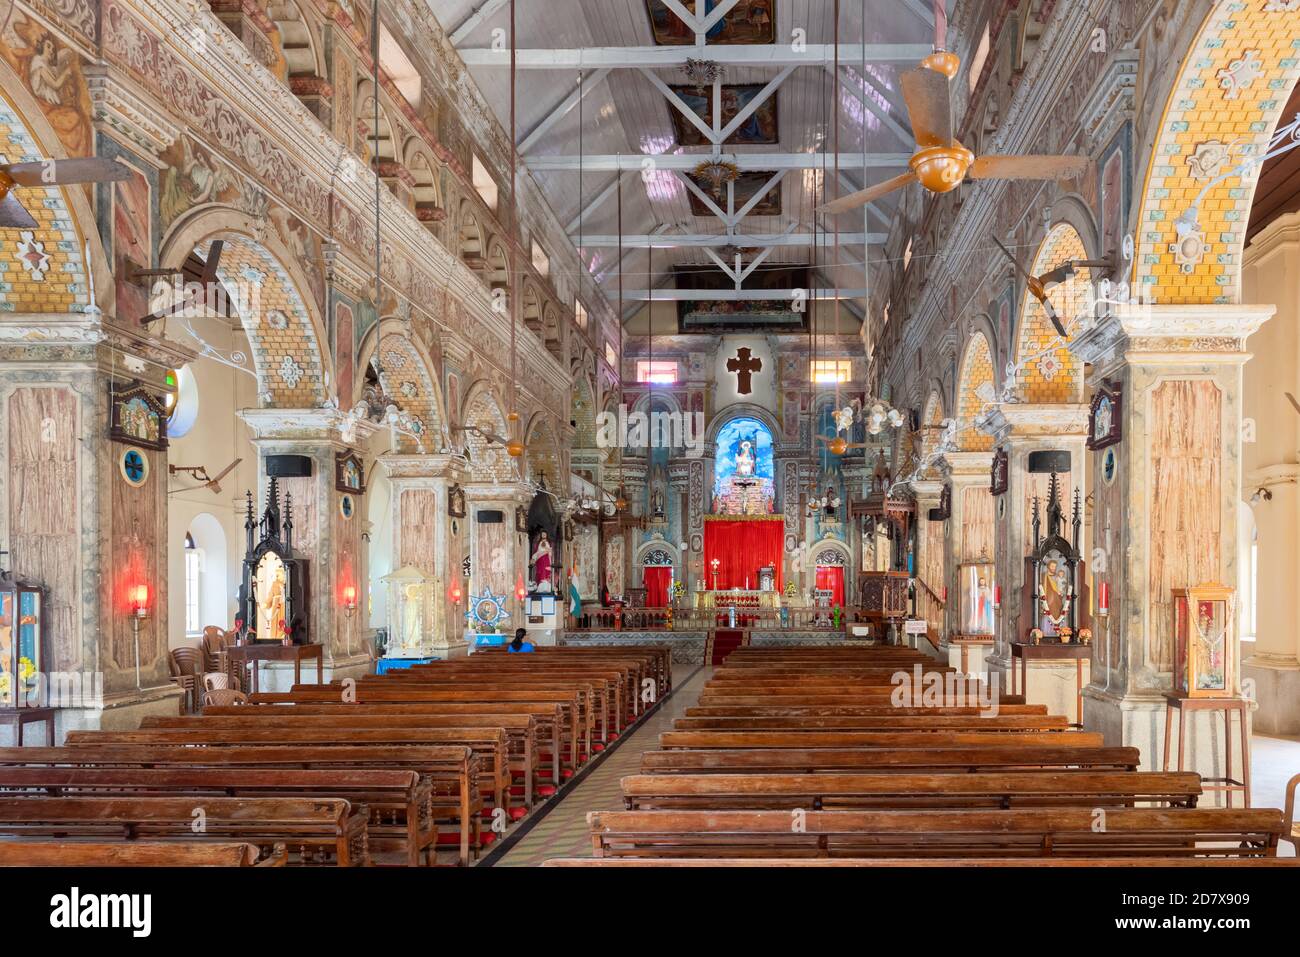 The interior view of the Gothic Santa Cruz Cathedral Basilica, also known as Kottepalli in Cochin, India Stock Photo